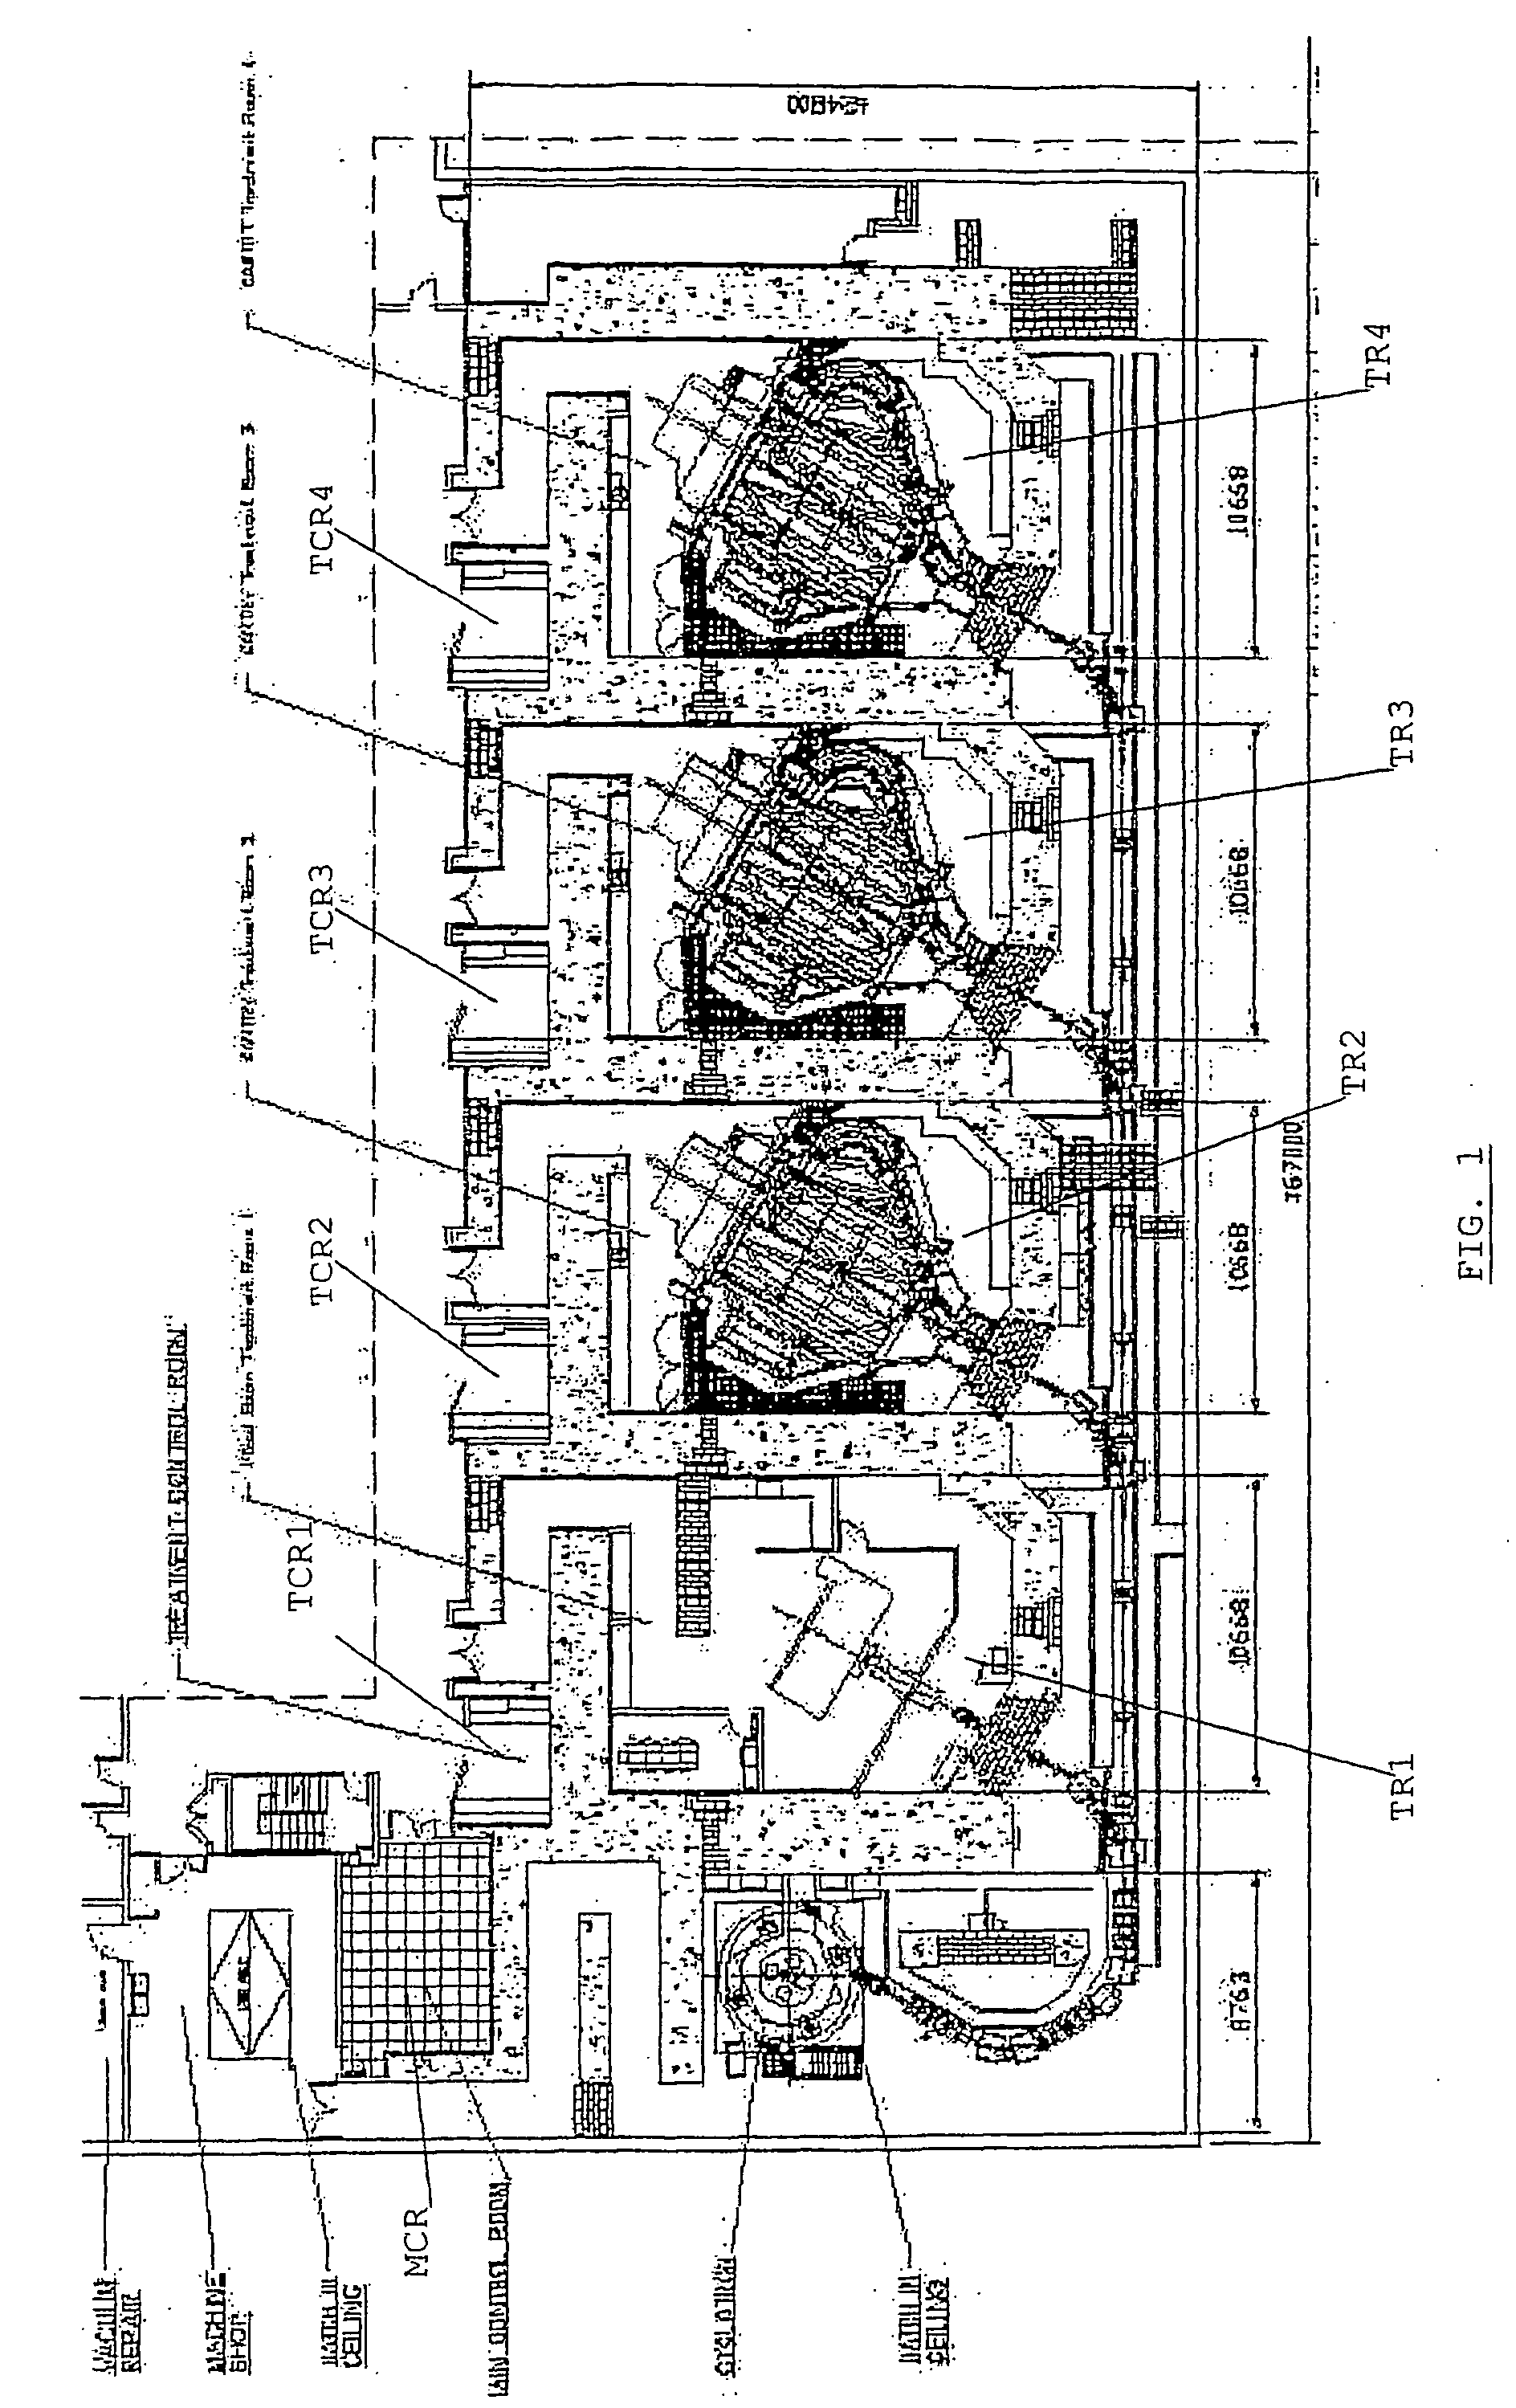 Method and system for automatic beam allocation in a multi-room particle beam treatment facility